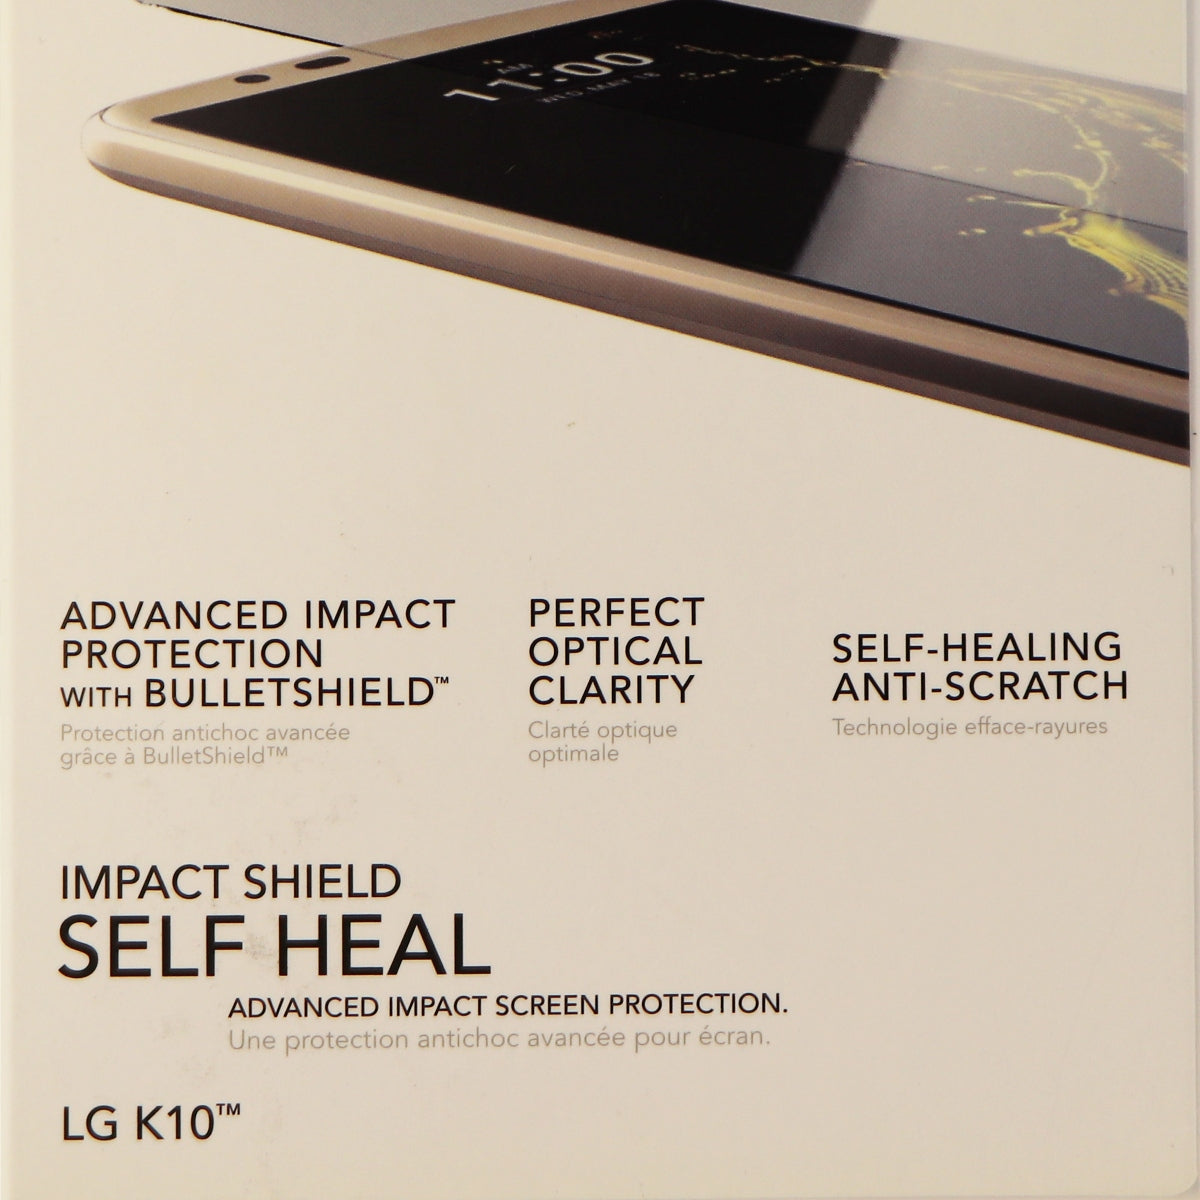 Tech21 Impact Shield Screen Protector Guard for LG K10 - Self Heal Clear Clarity Cell Phone - Screen Protectors tech21    - Simple Cell Bulk Wholesale Pricing - USA Seller